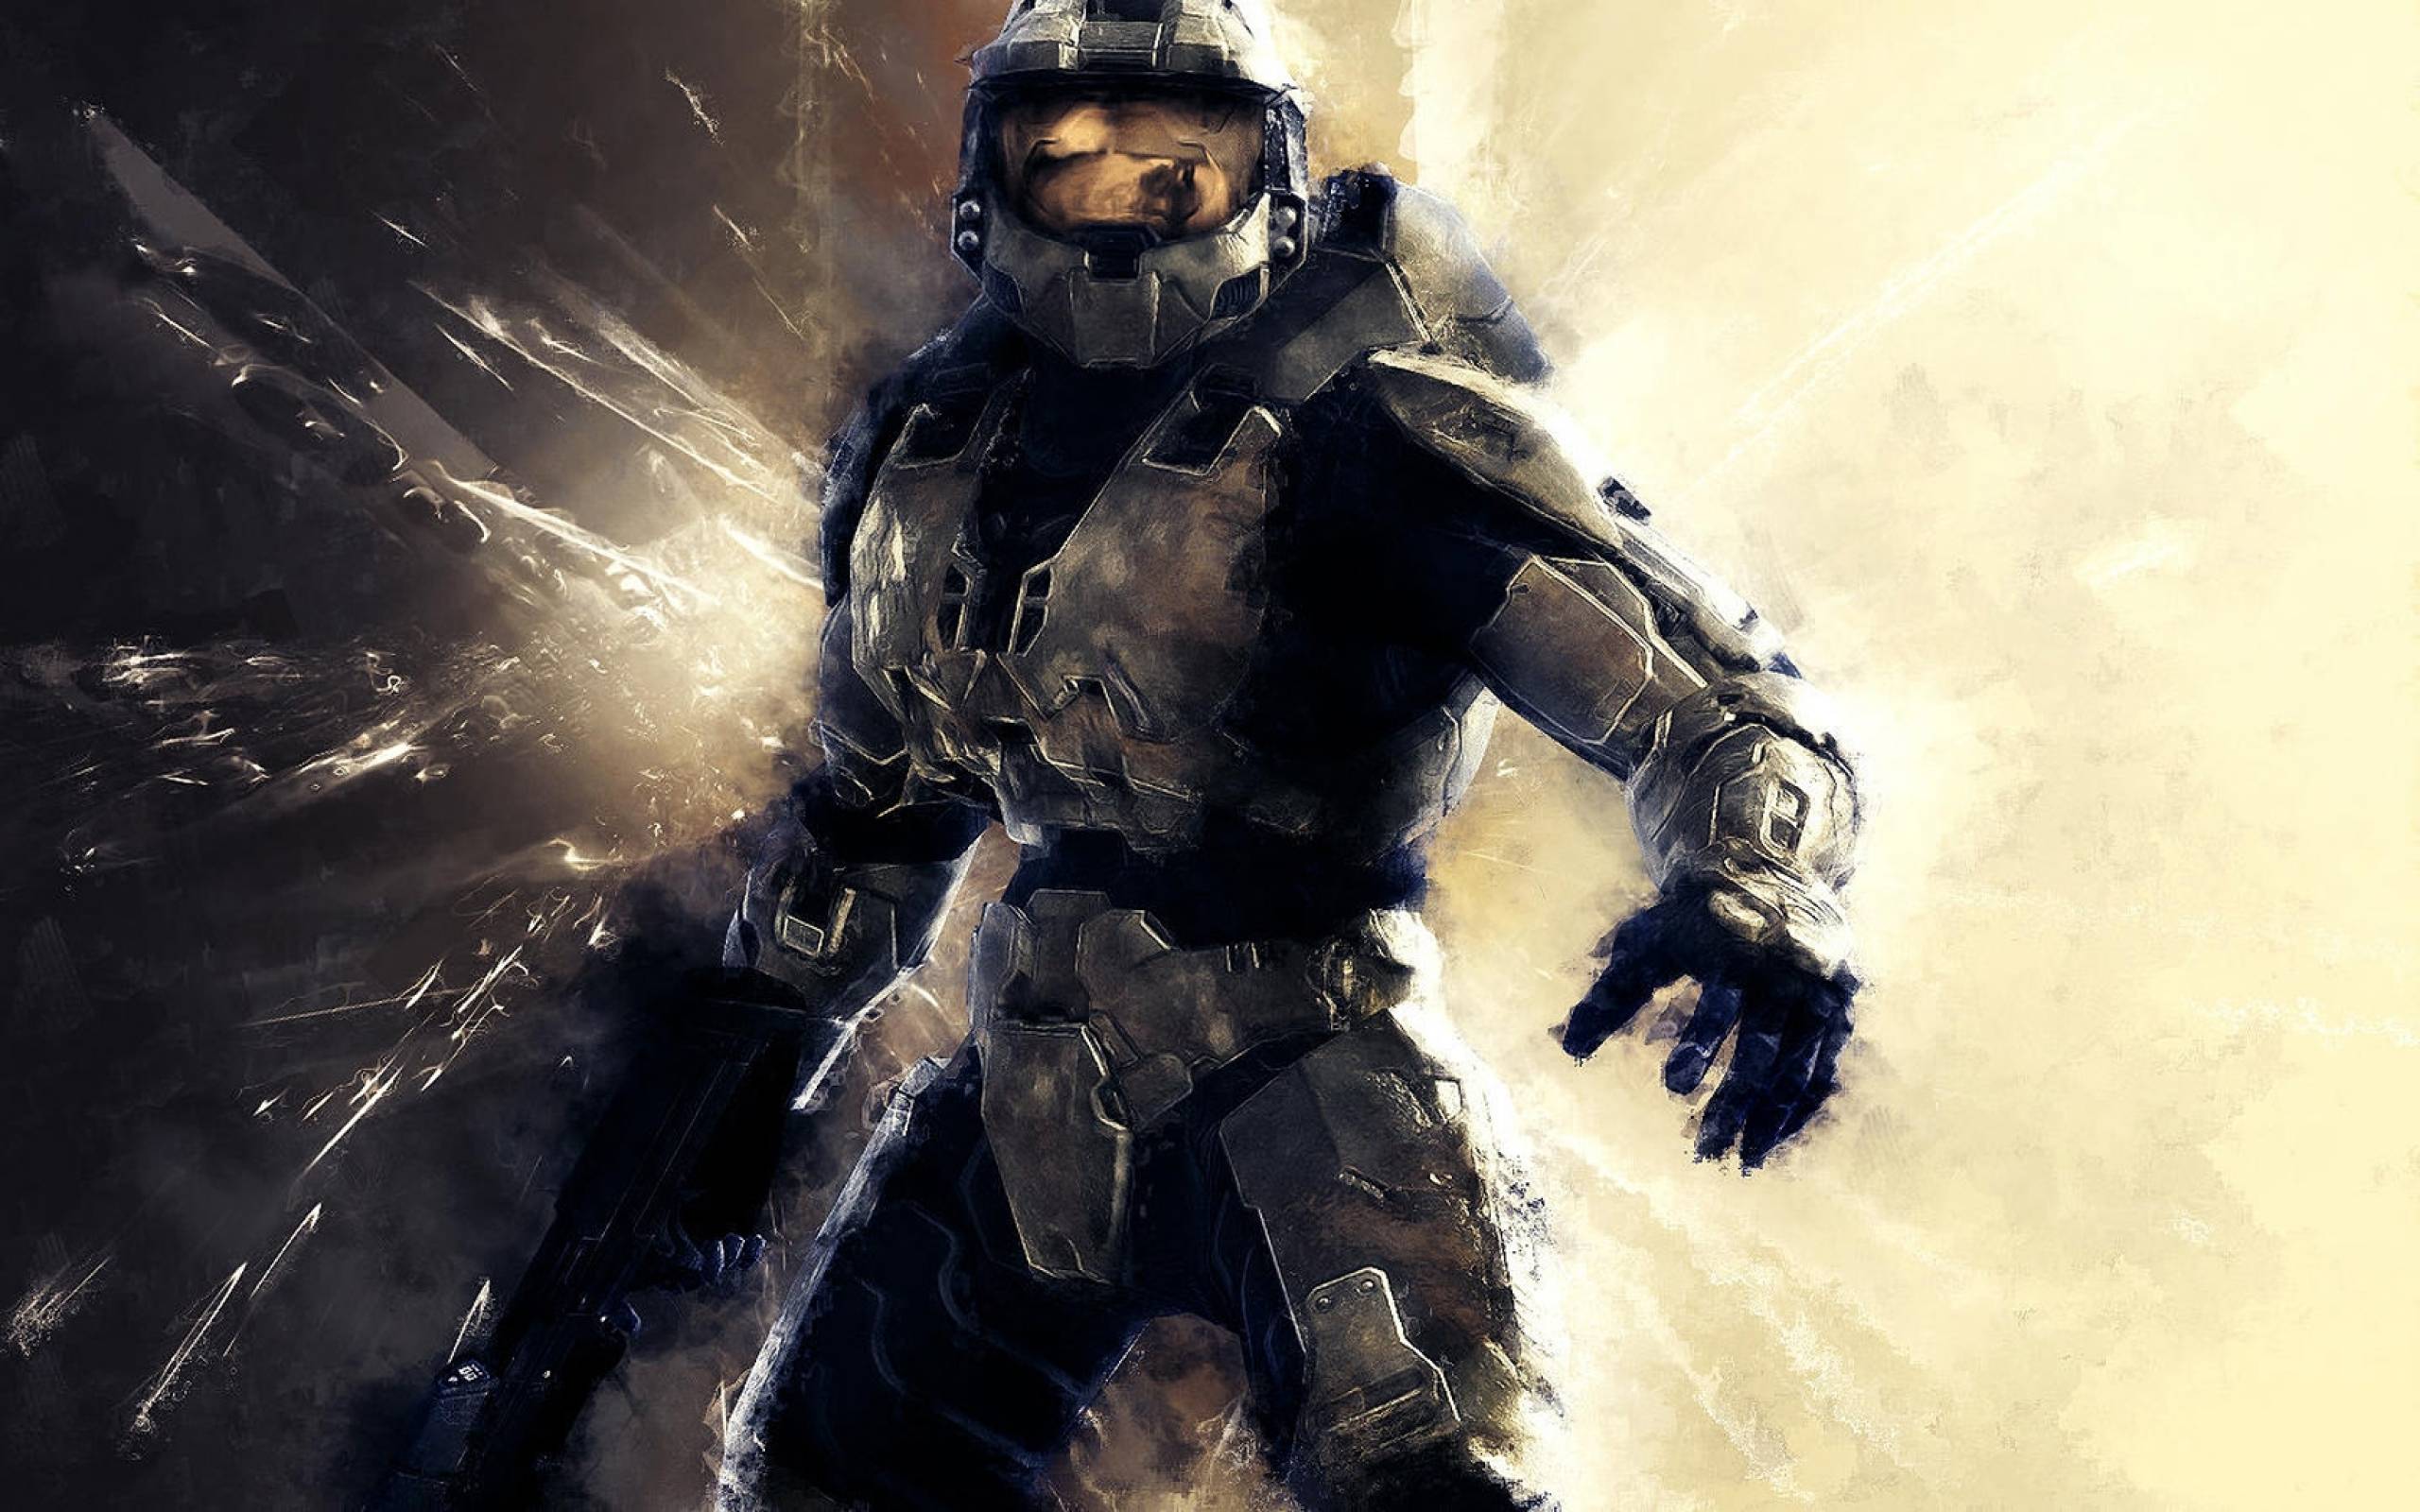 image For > Halo 4 Wallpaper 1920x1080